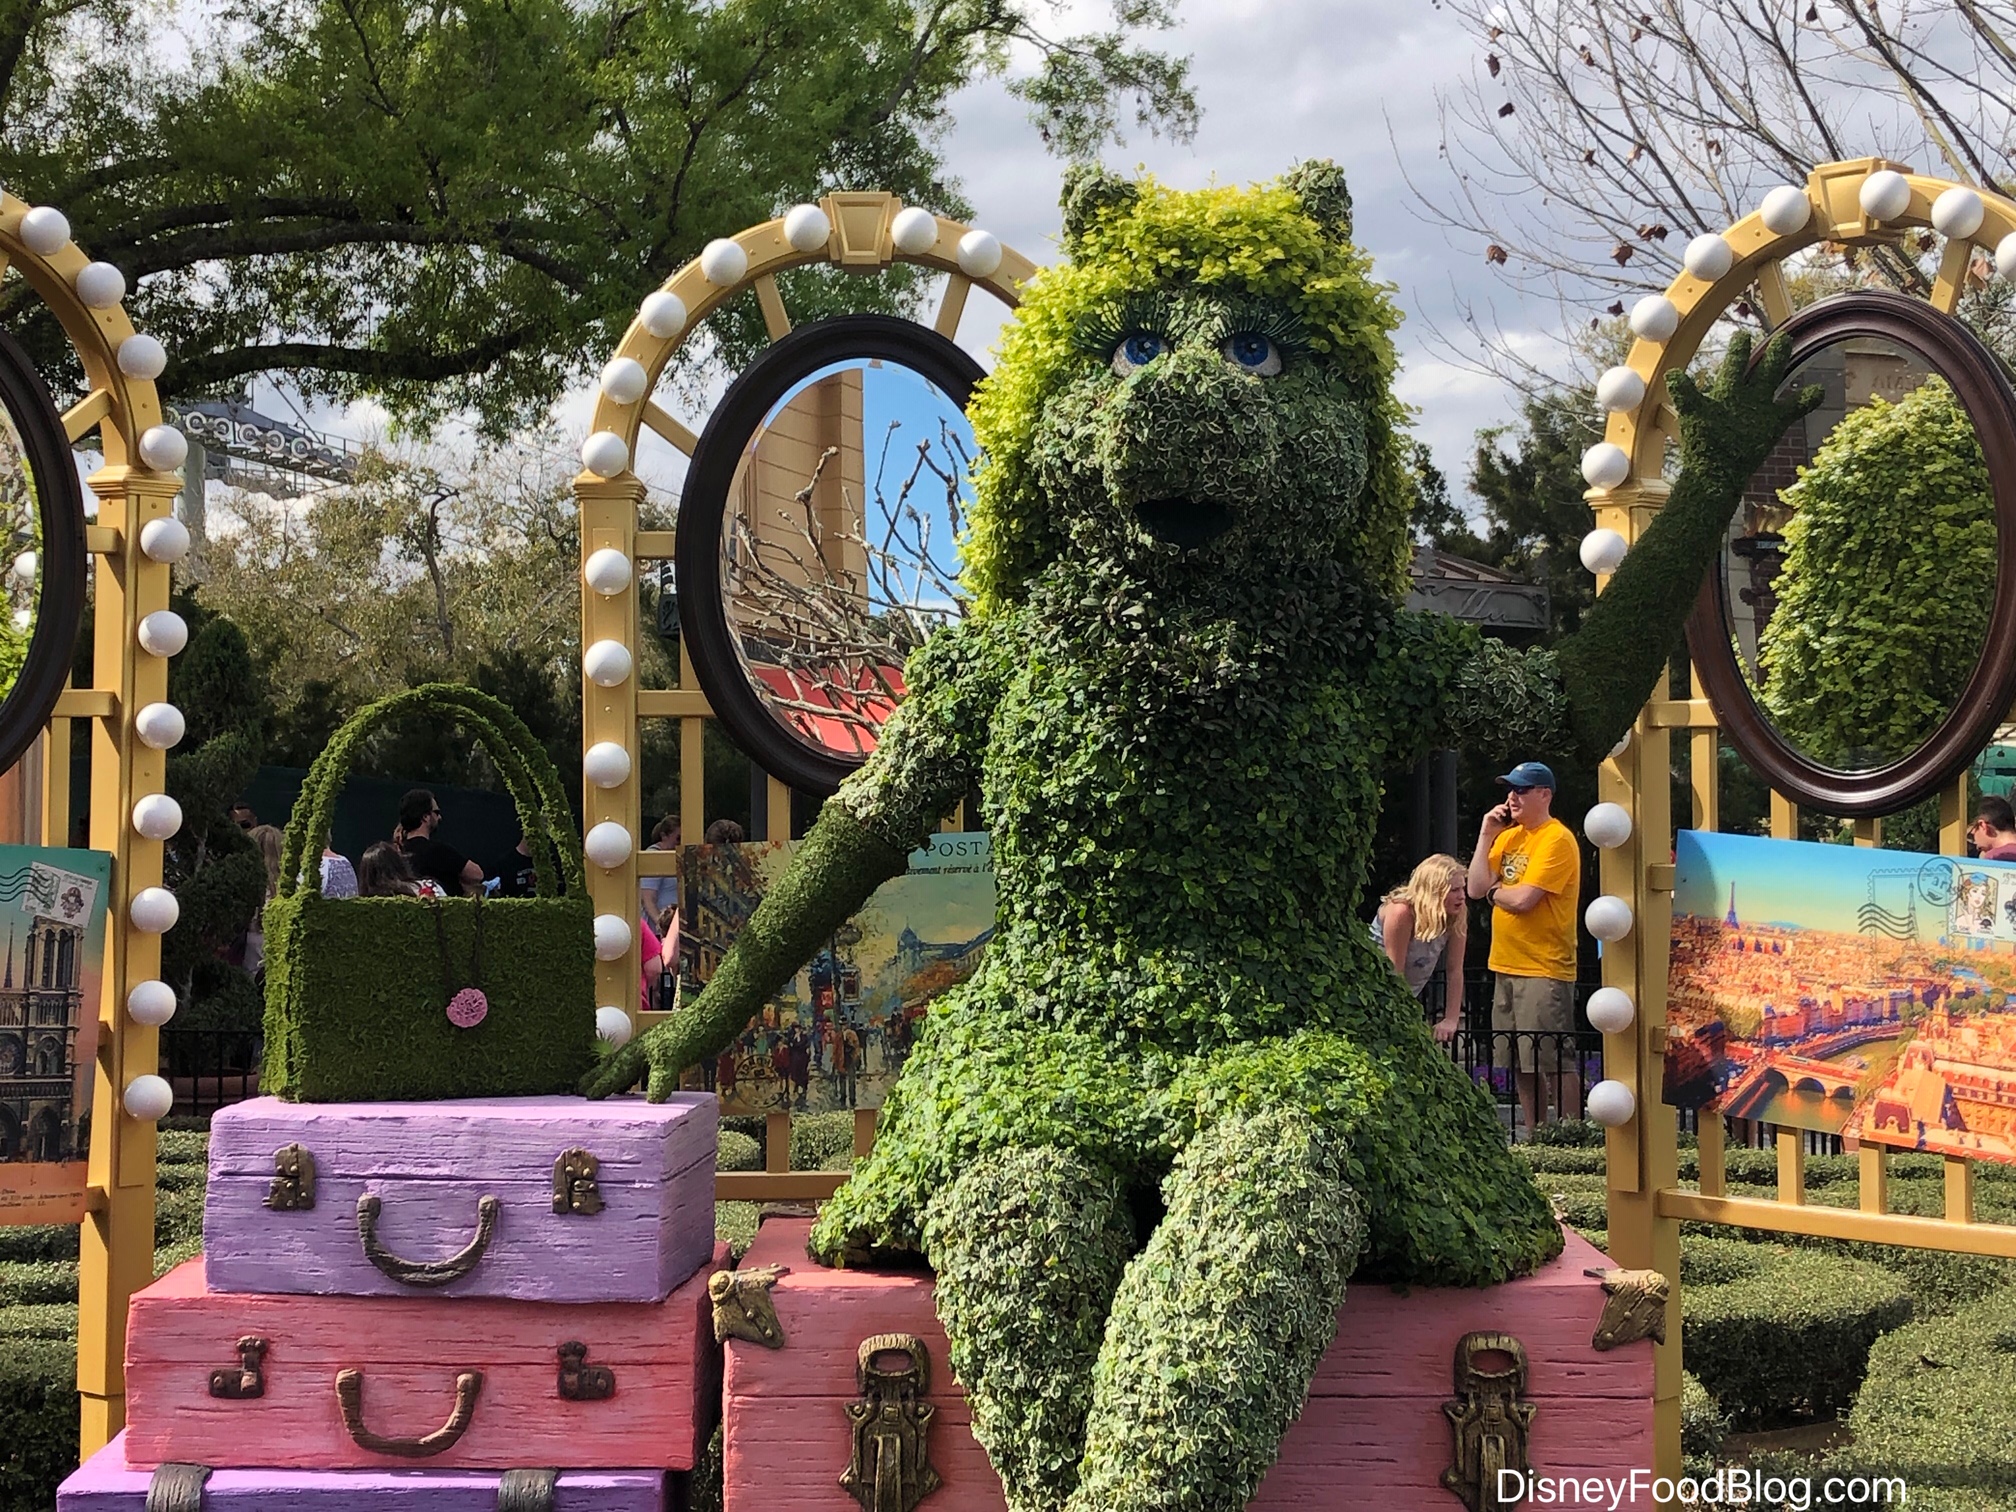 kermit is here! check out the most adorable addition to the epcot